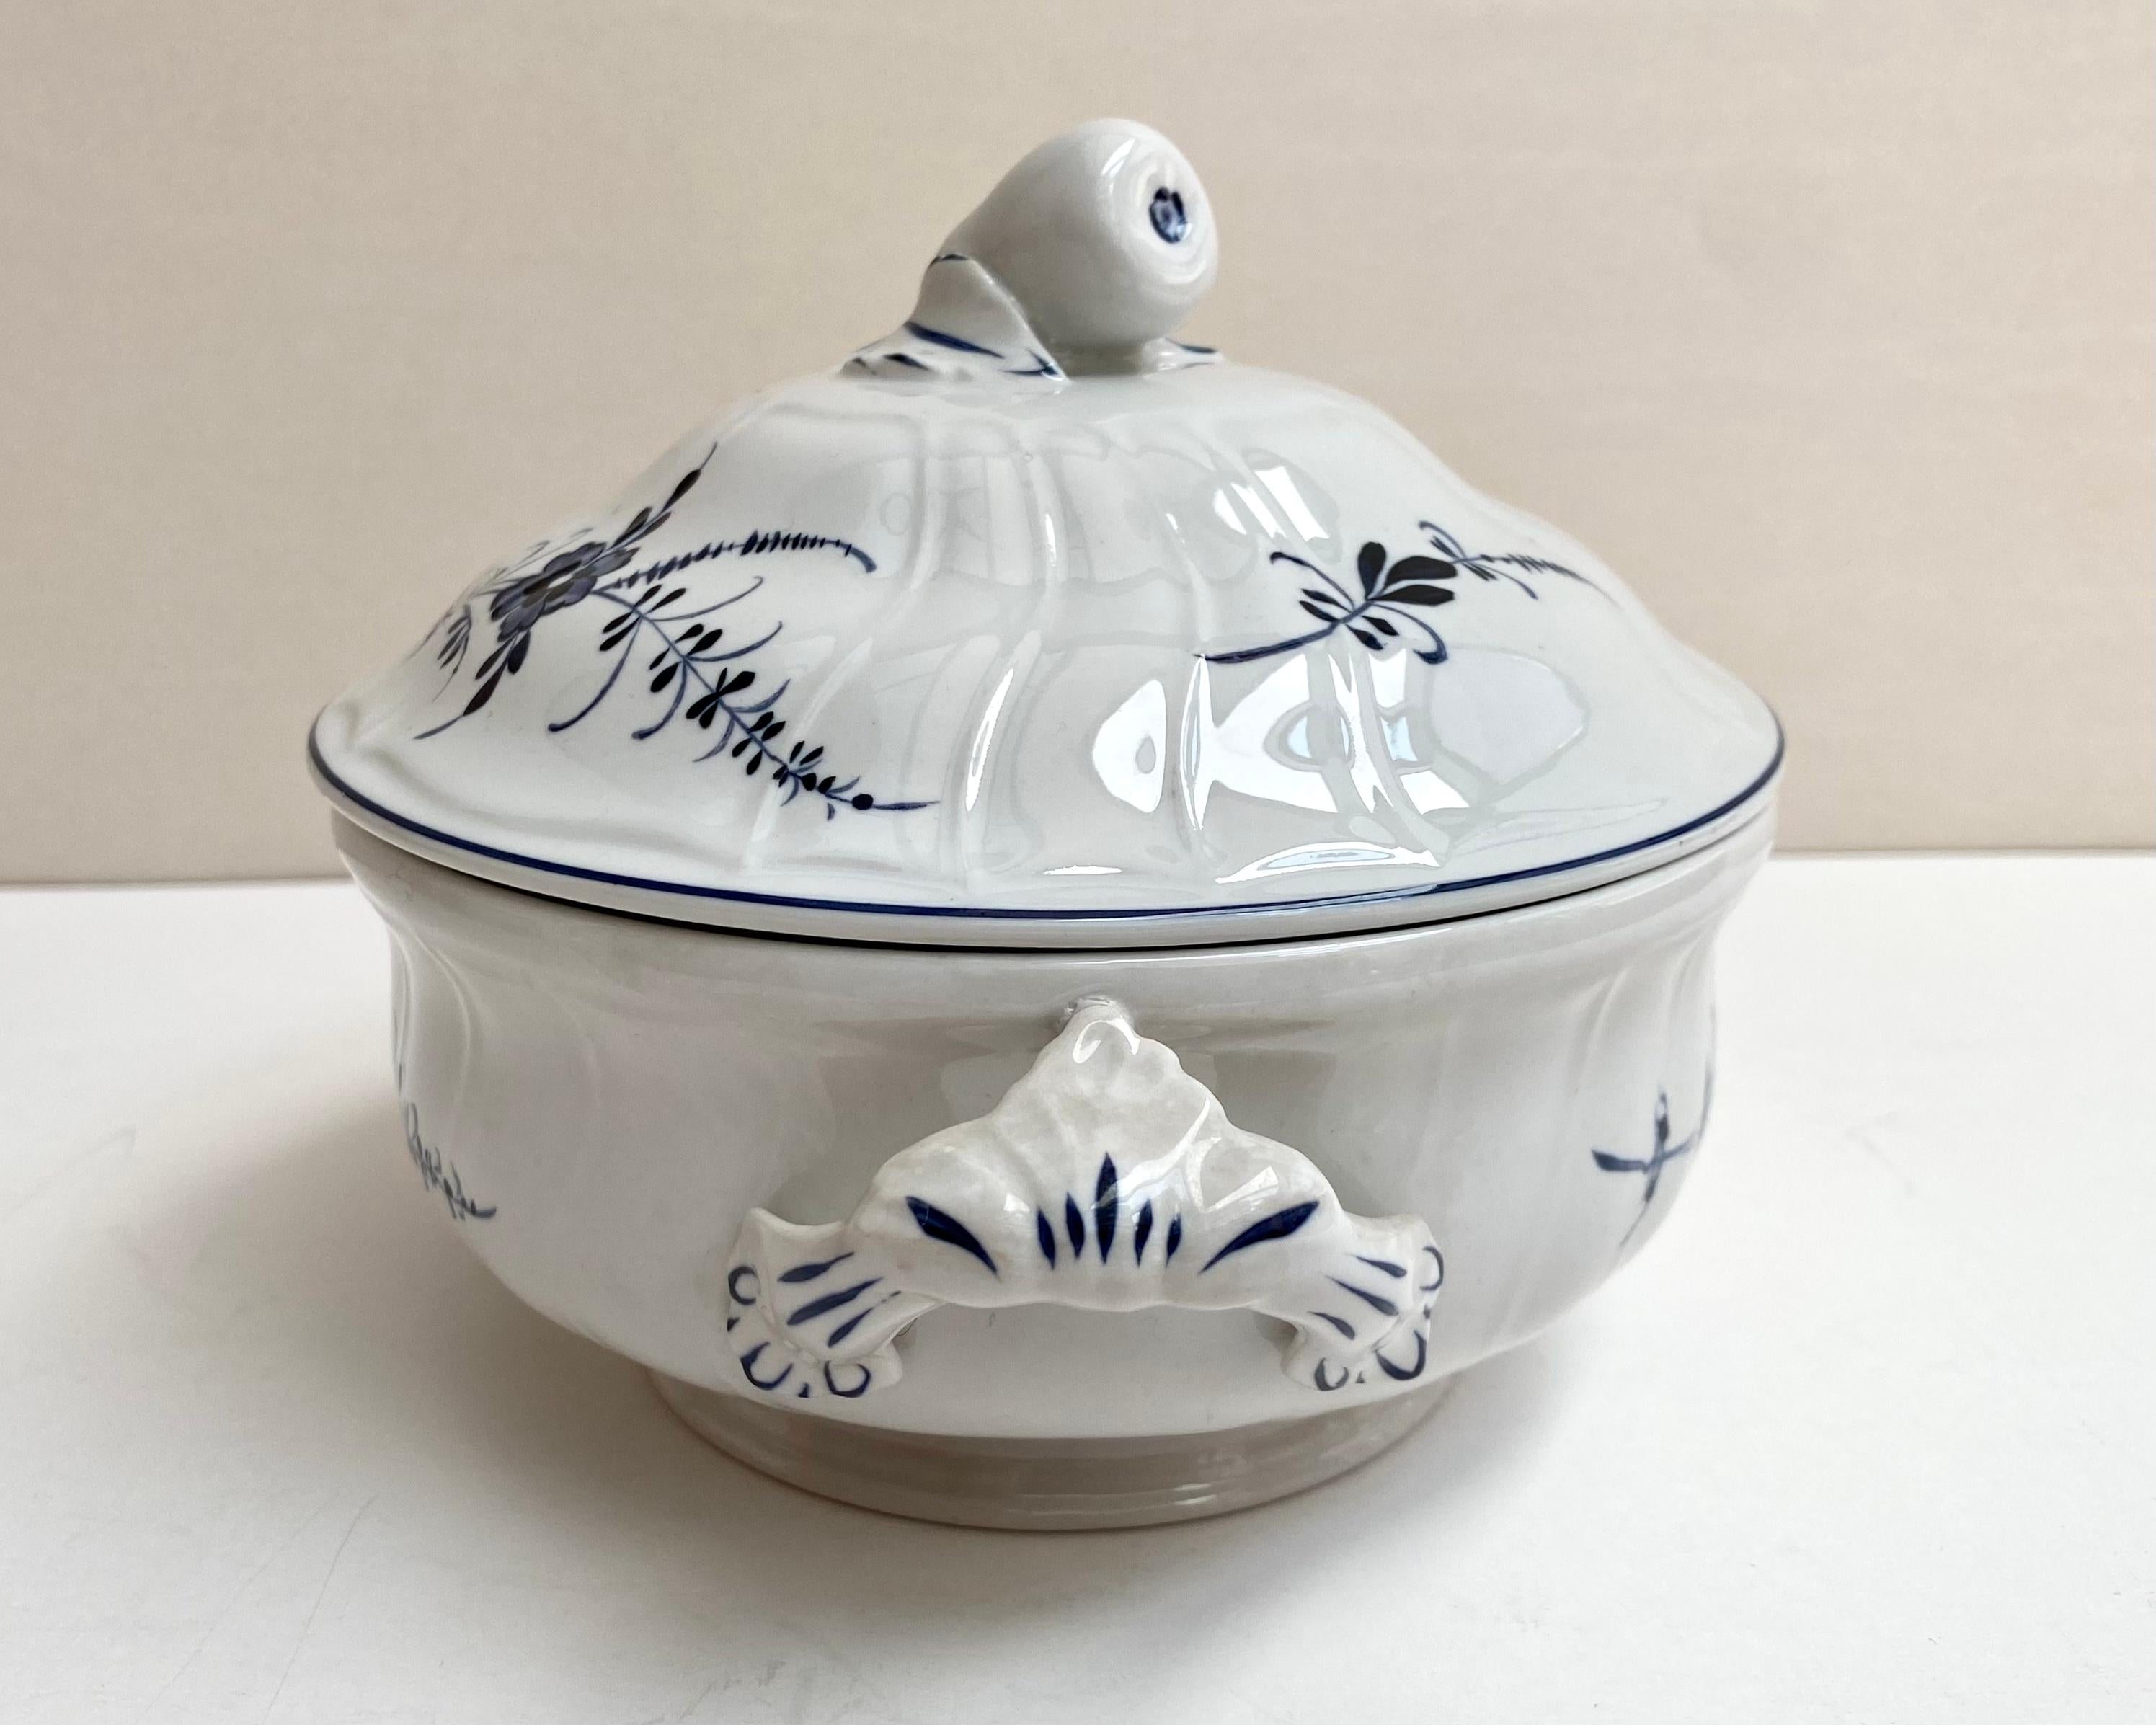 Luxembourgish Villeroy & Boch Vieux Luxembourg 'Old Luxembourg' Candy Tureen with Lid For Sale